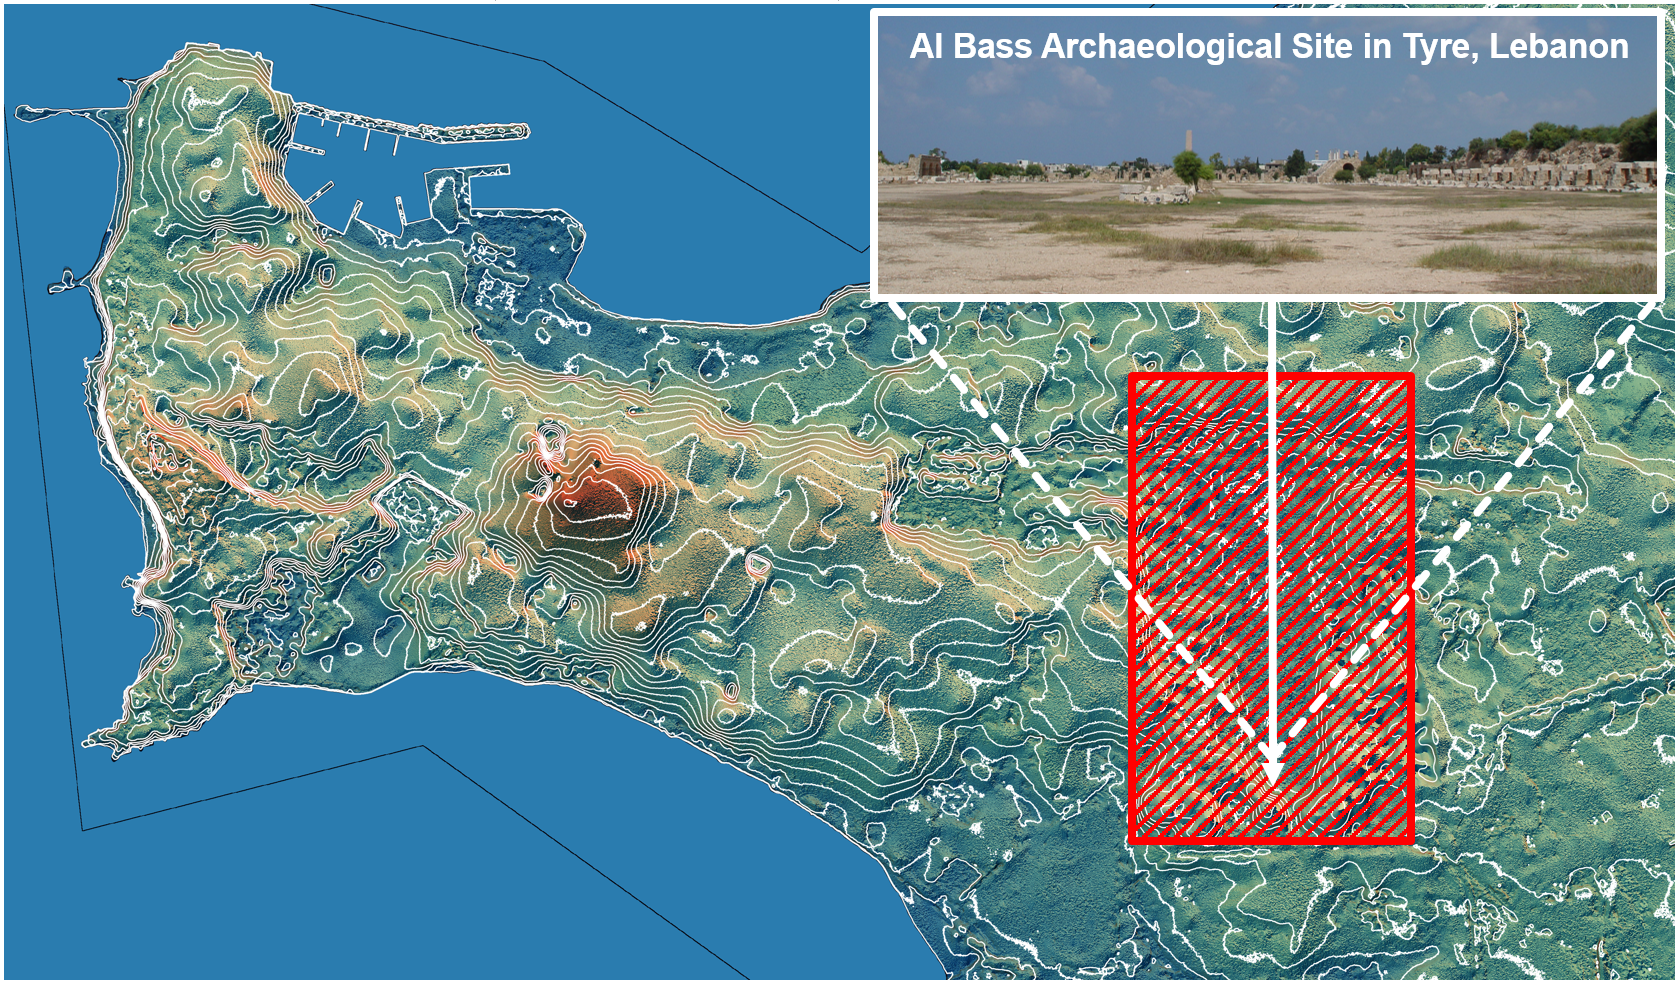 Archaeological Research of Buried Mausoleums in Conflict Areas – Al Bass site, Tyre, Lebanon